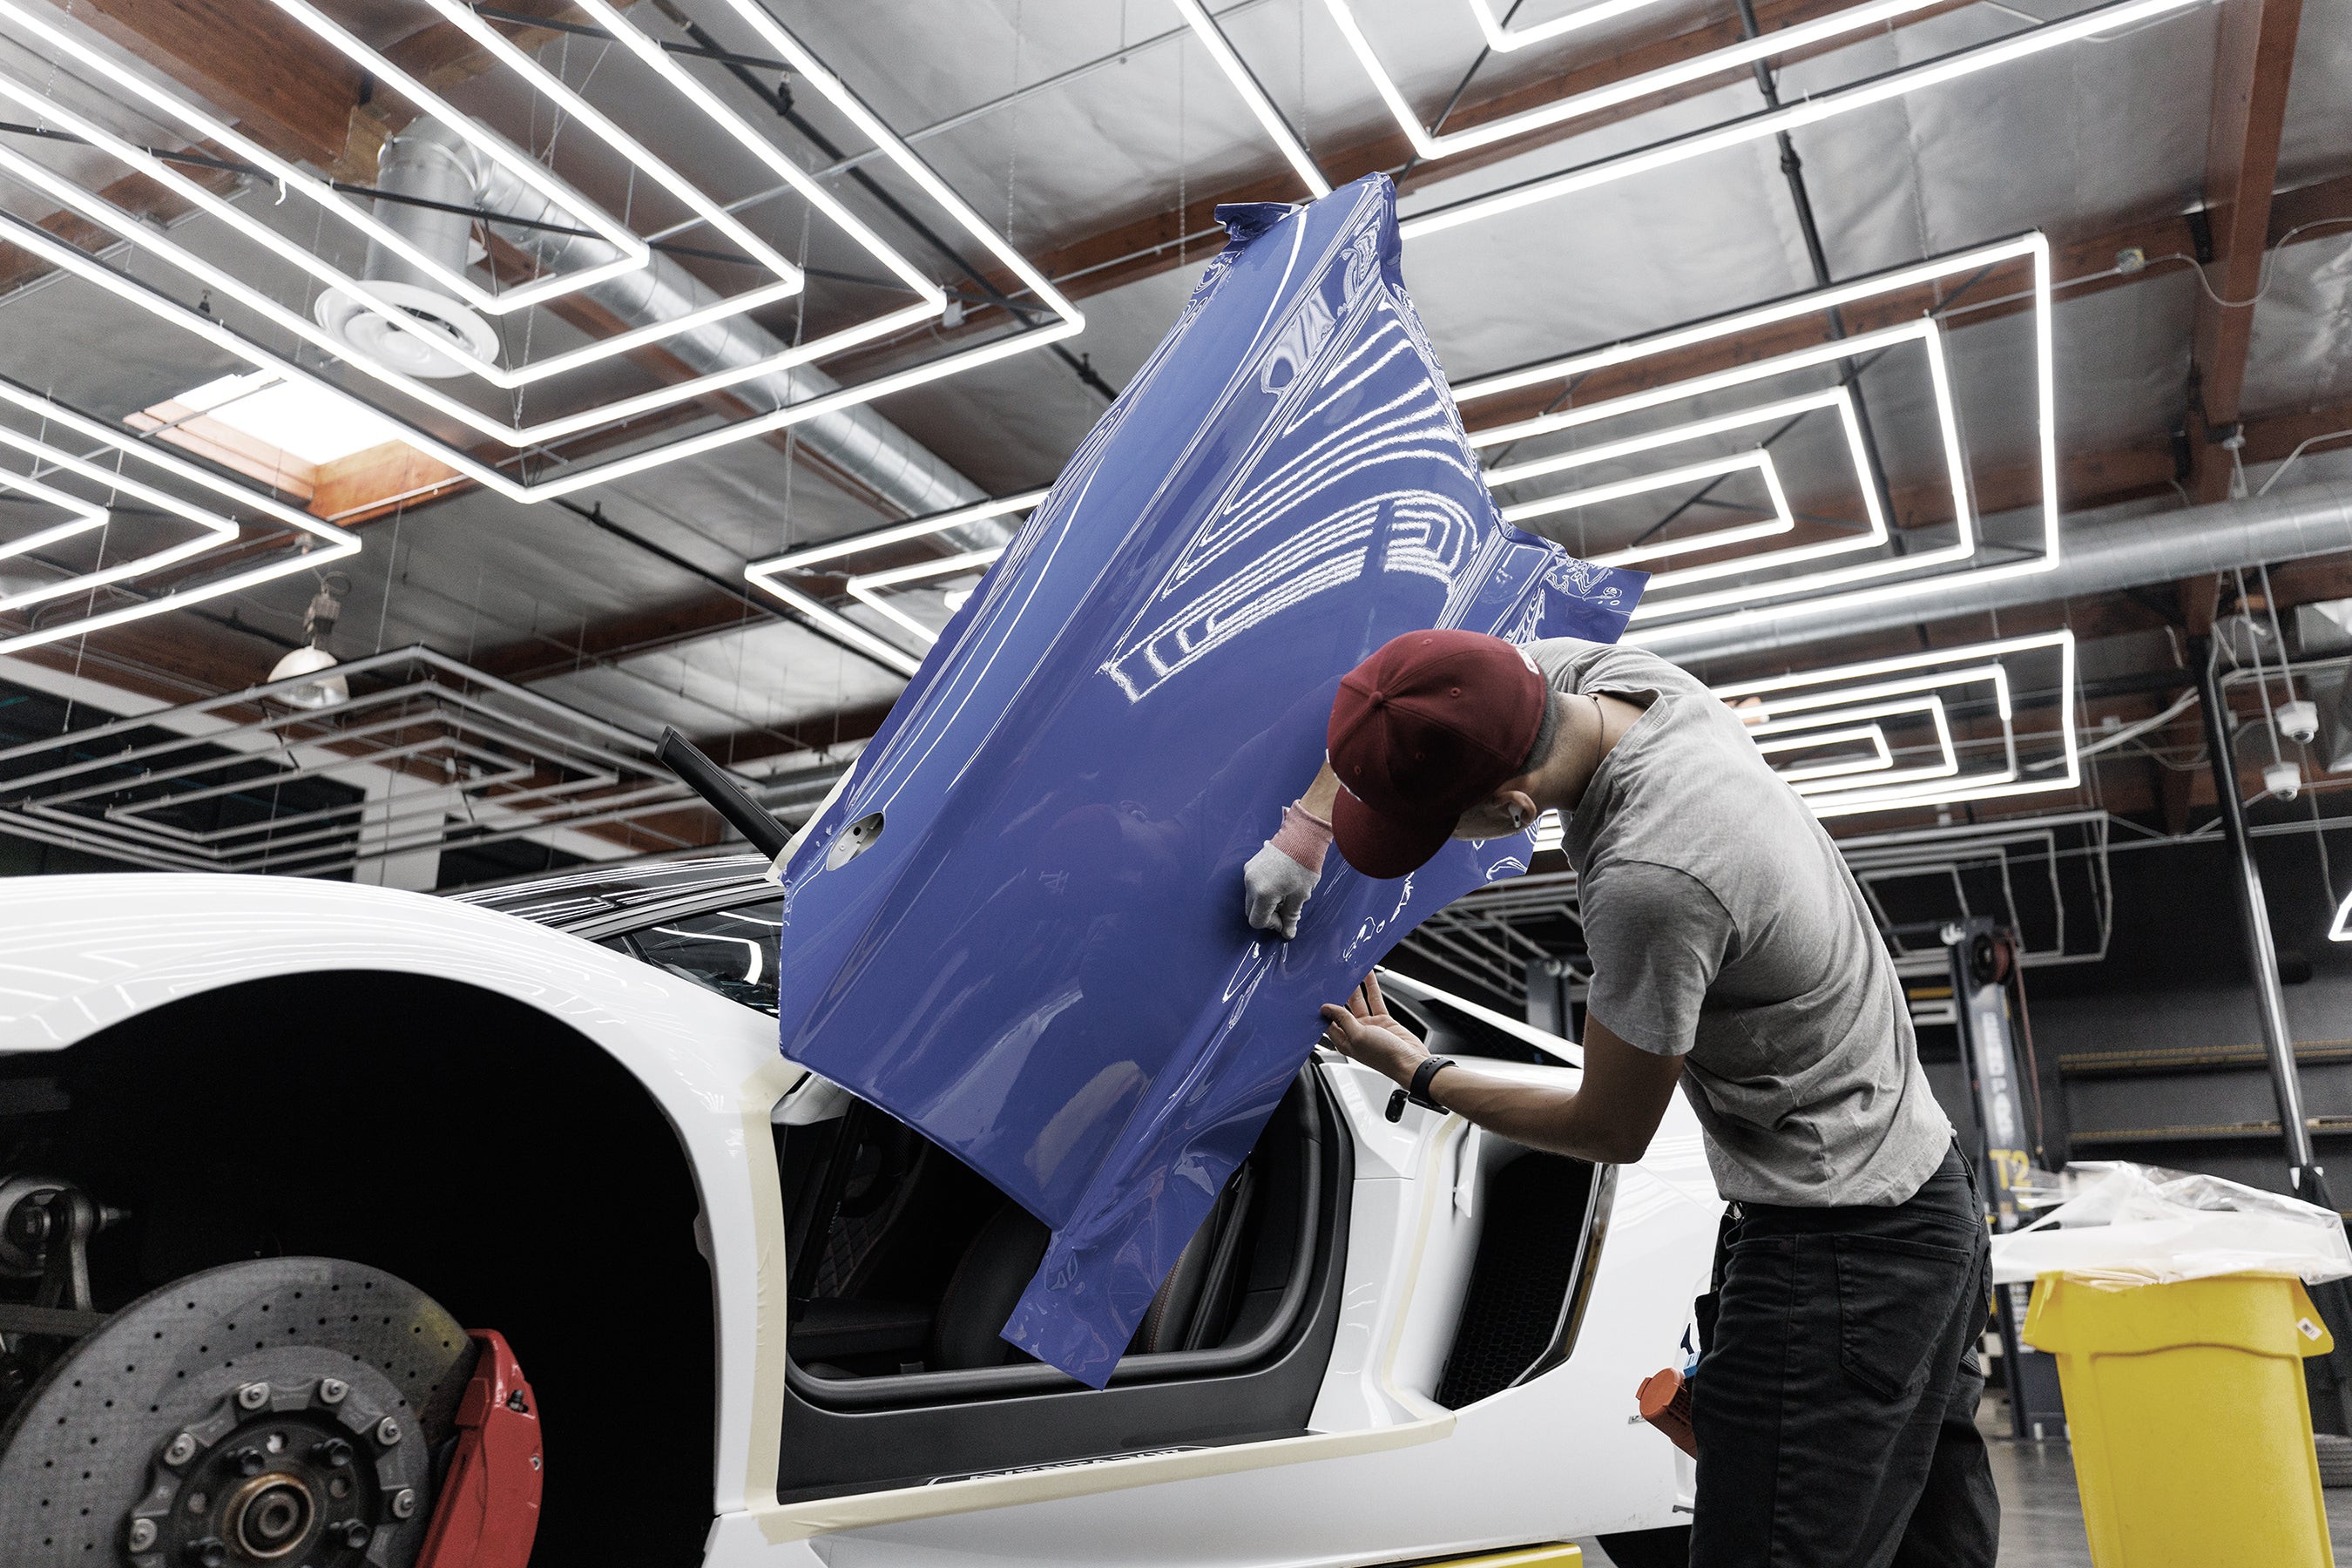 The Benefits Of Vinyl Wrapping A Vehicle